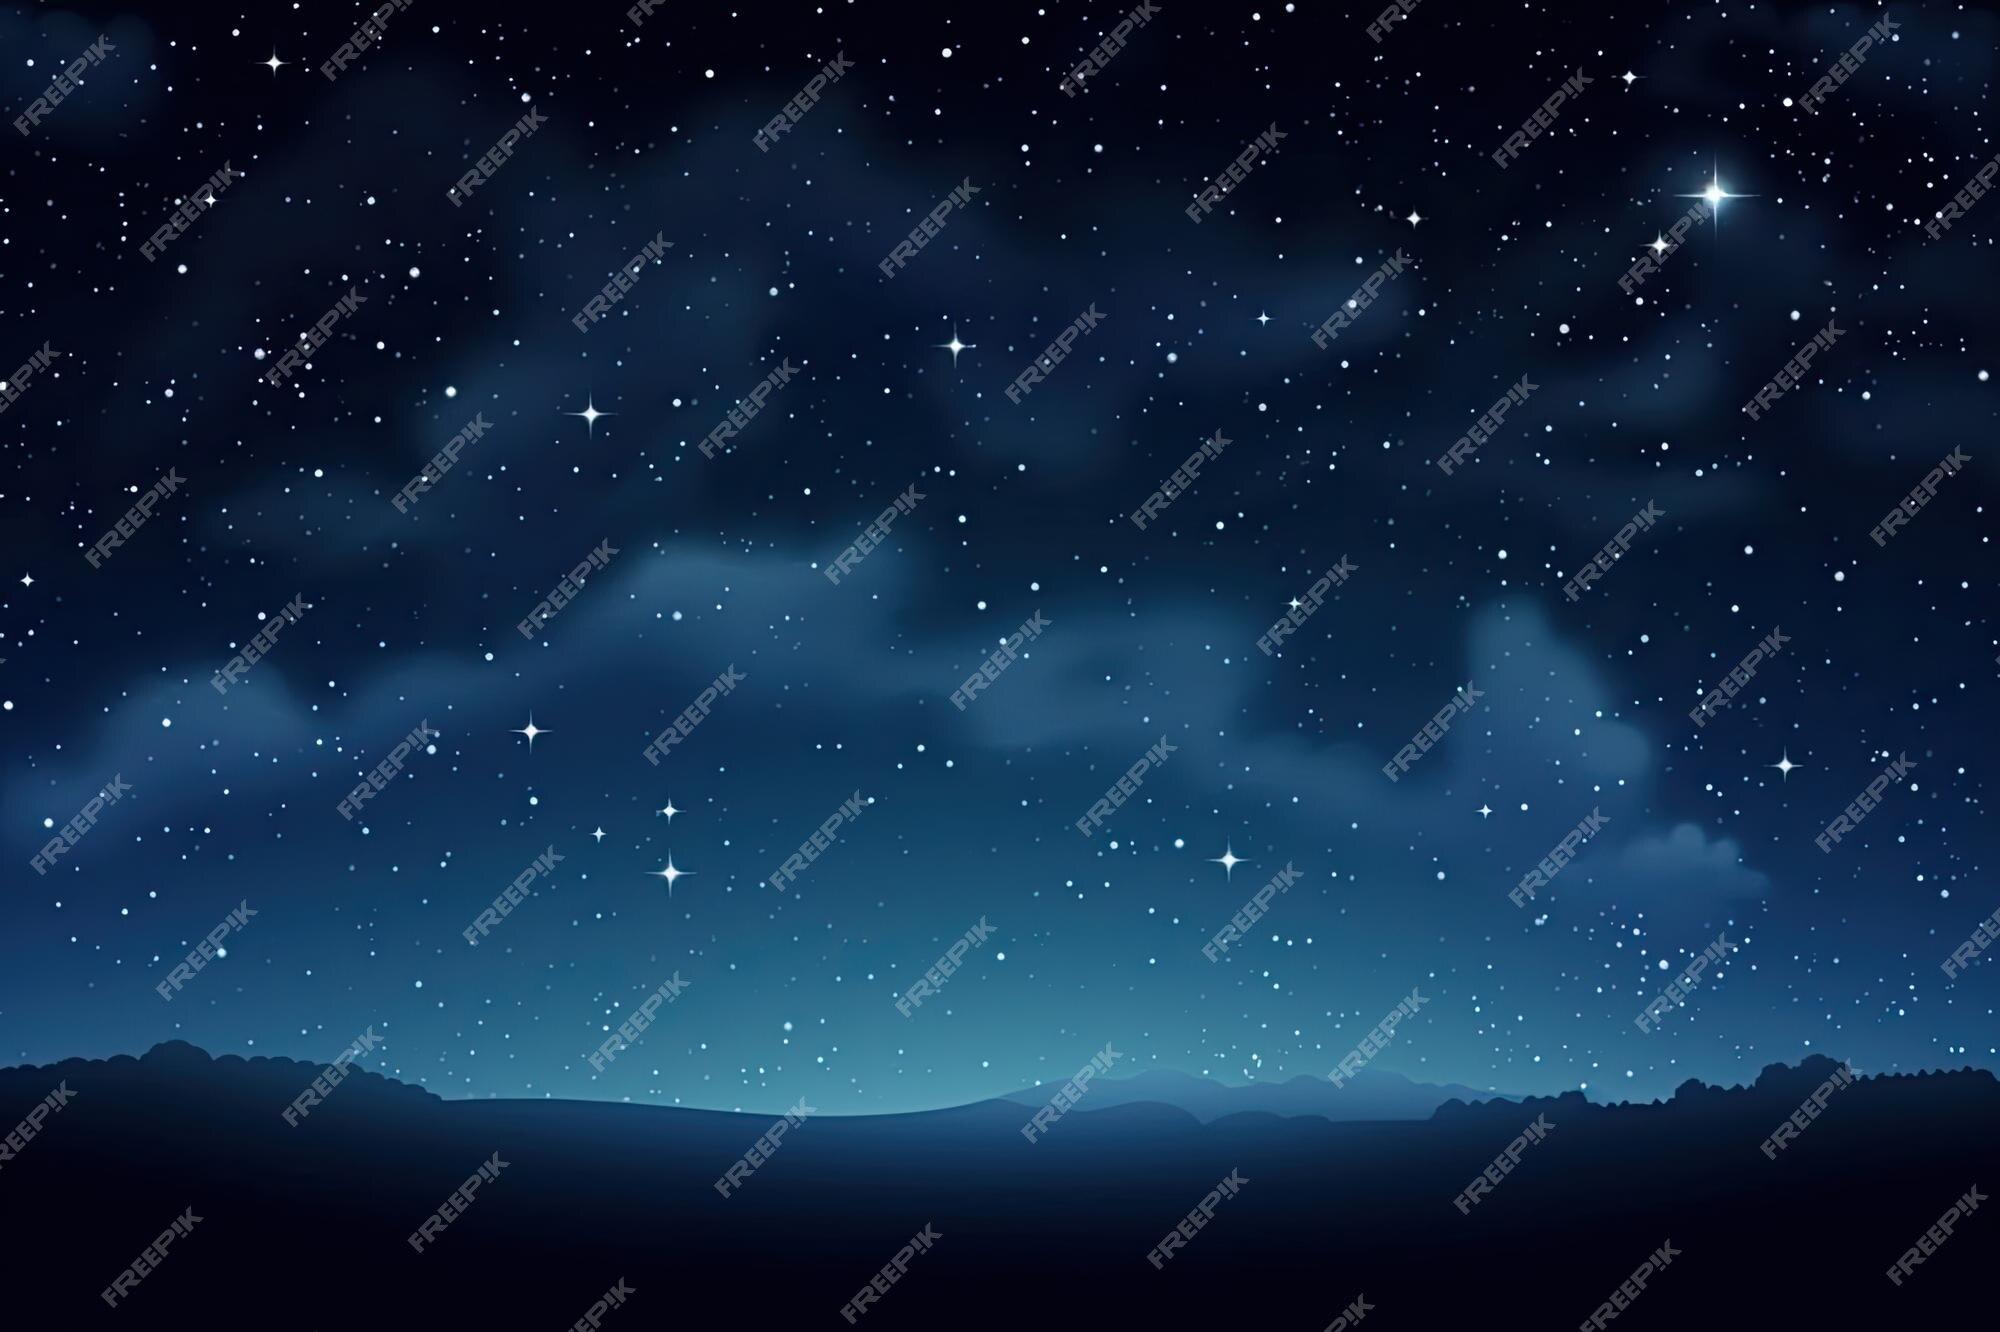 Free download Premium Photo Background of an illustration of a starry ...